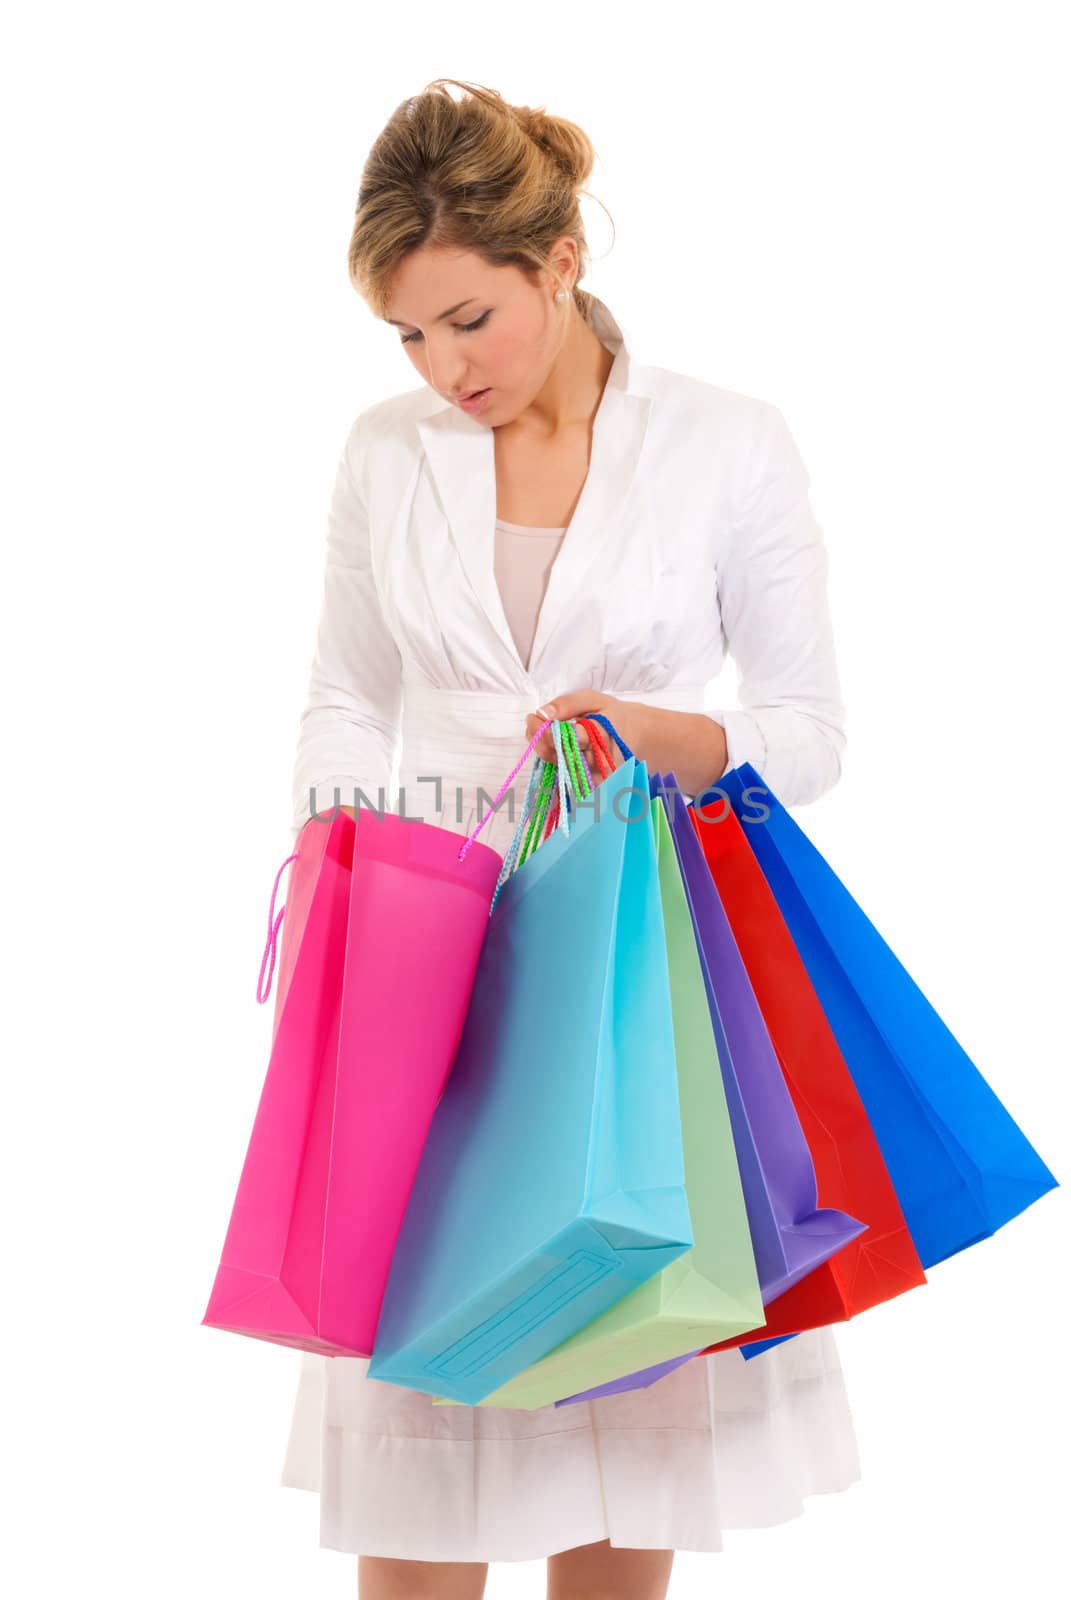 Young woman with shopping bags standing looking into bag isolated on white background by dgmata